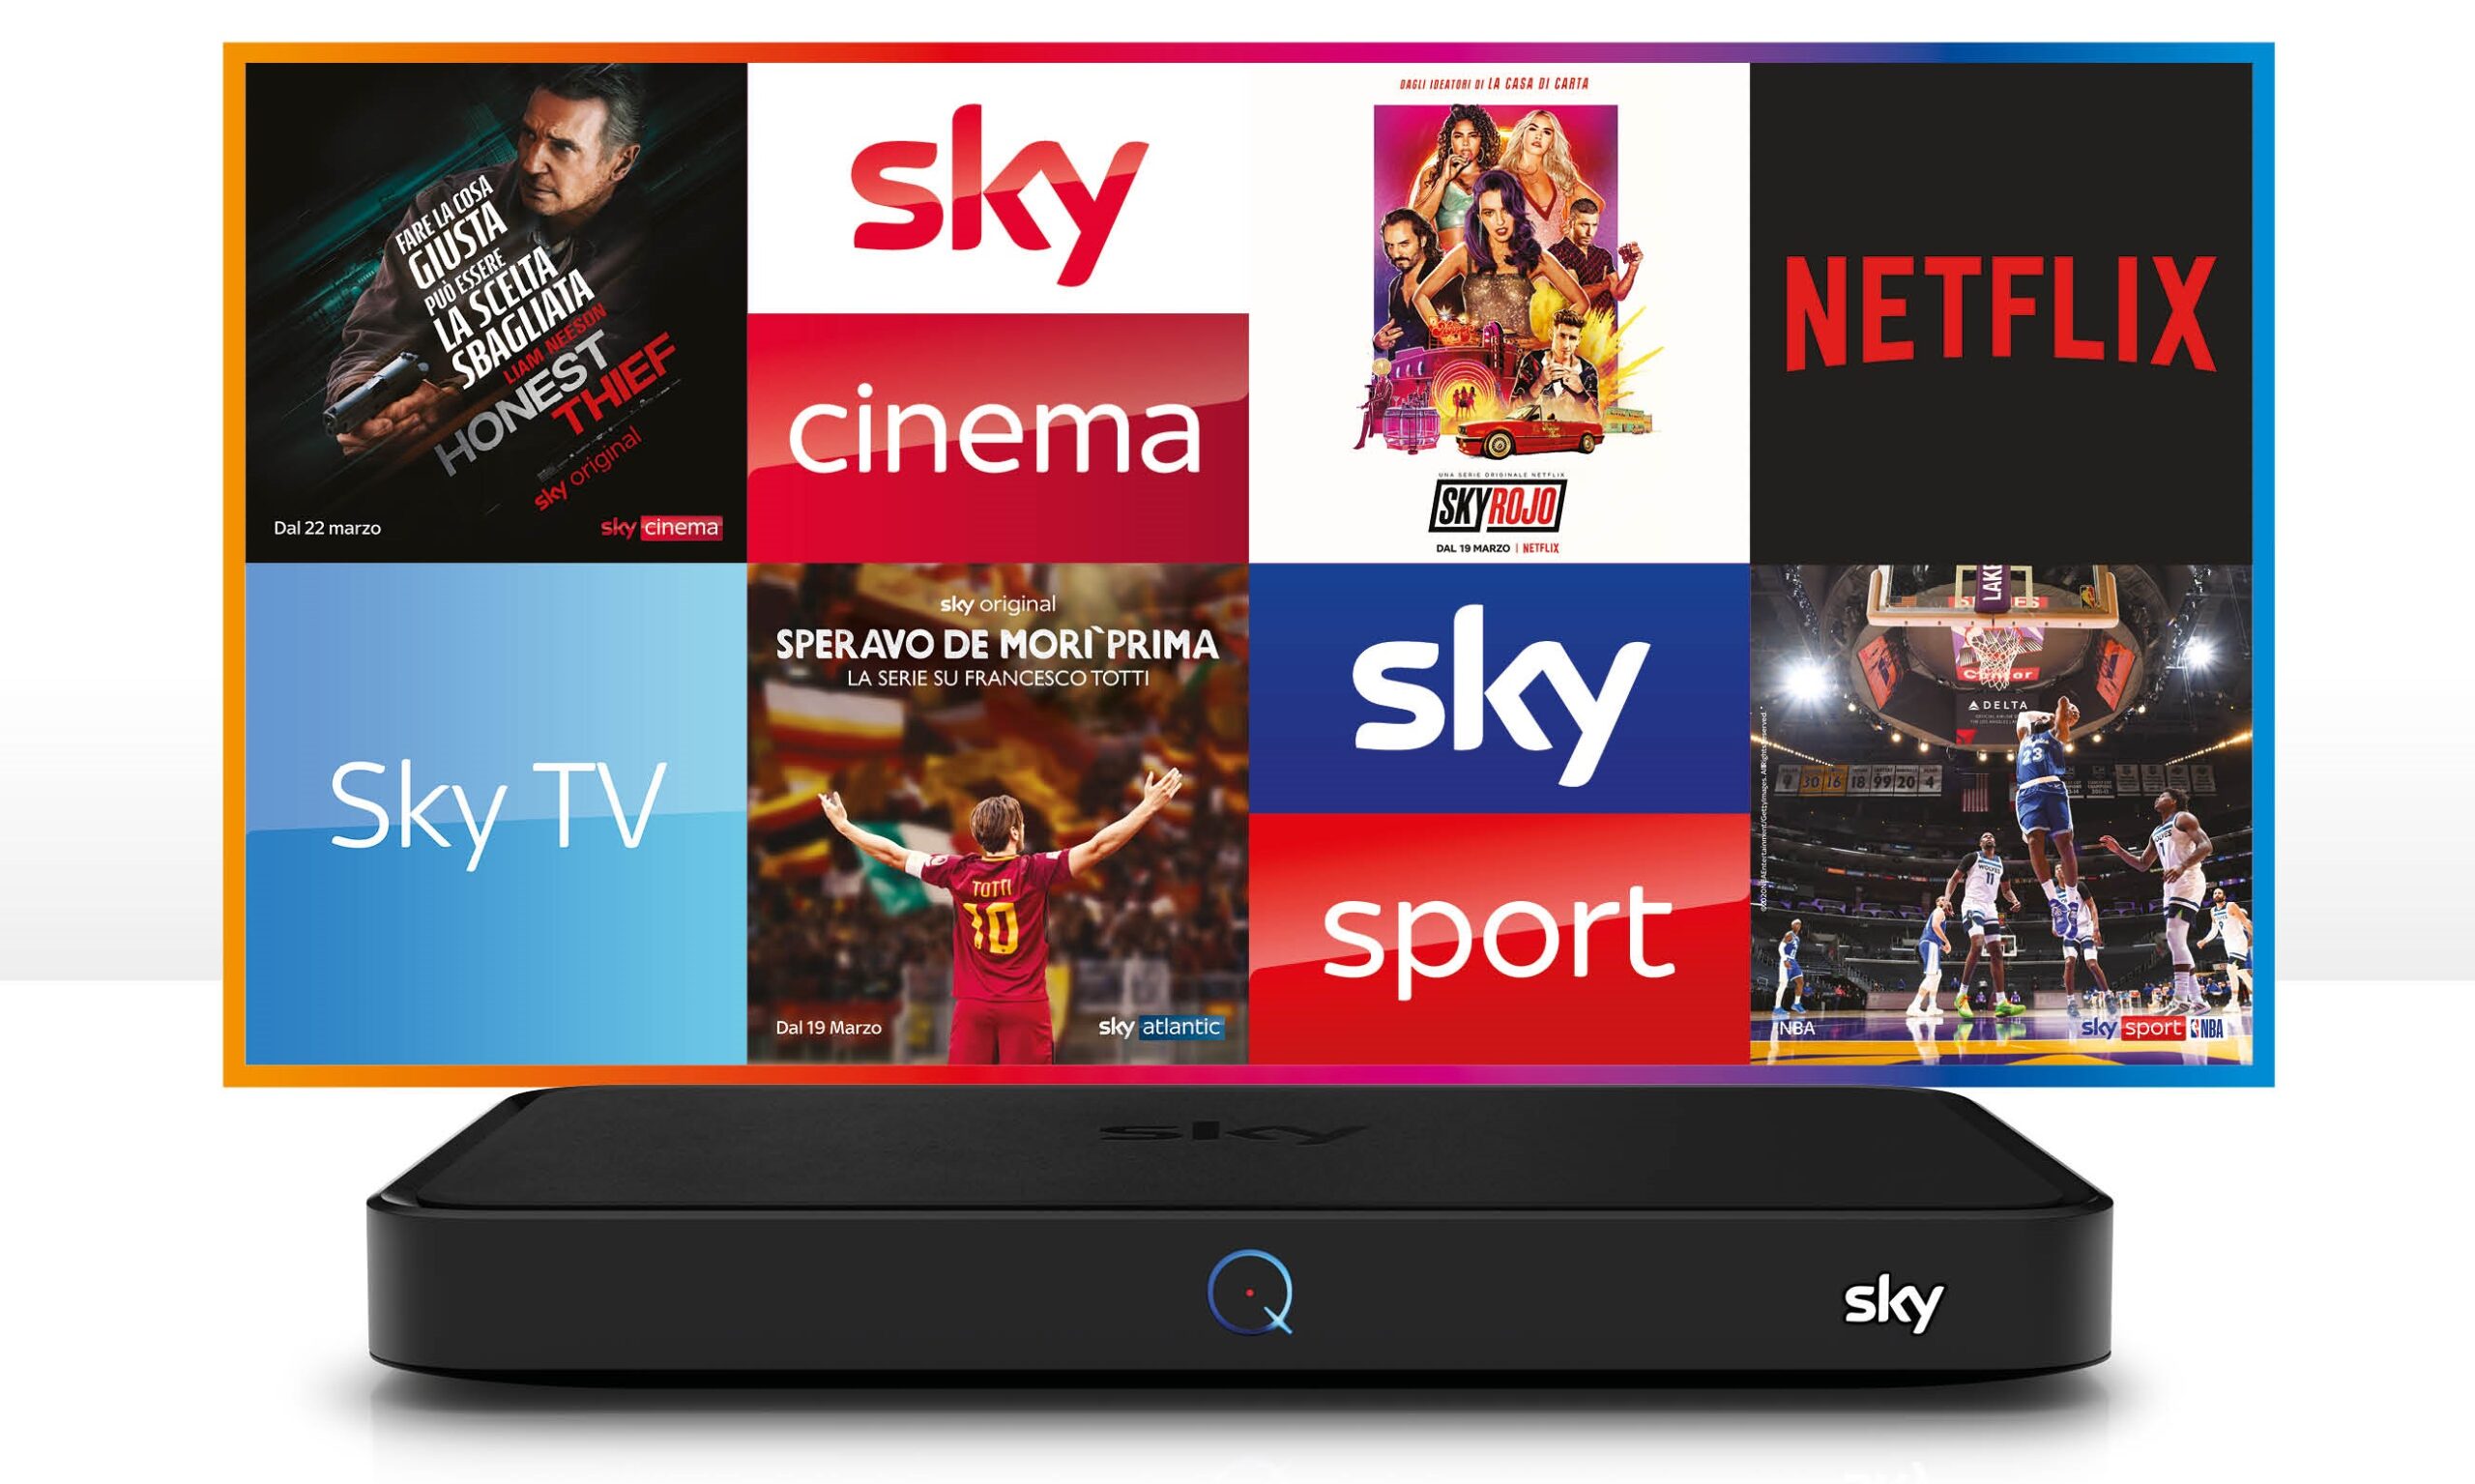 Sky Q decoders are updated: support for 4K HDR thumbnail arrives